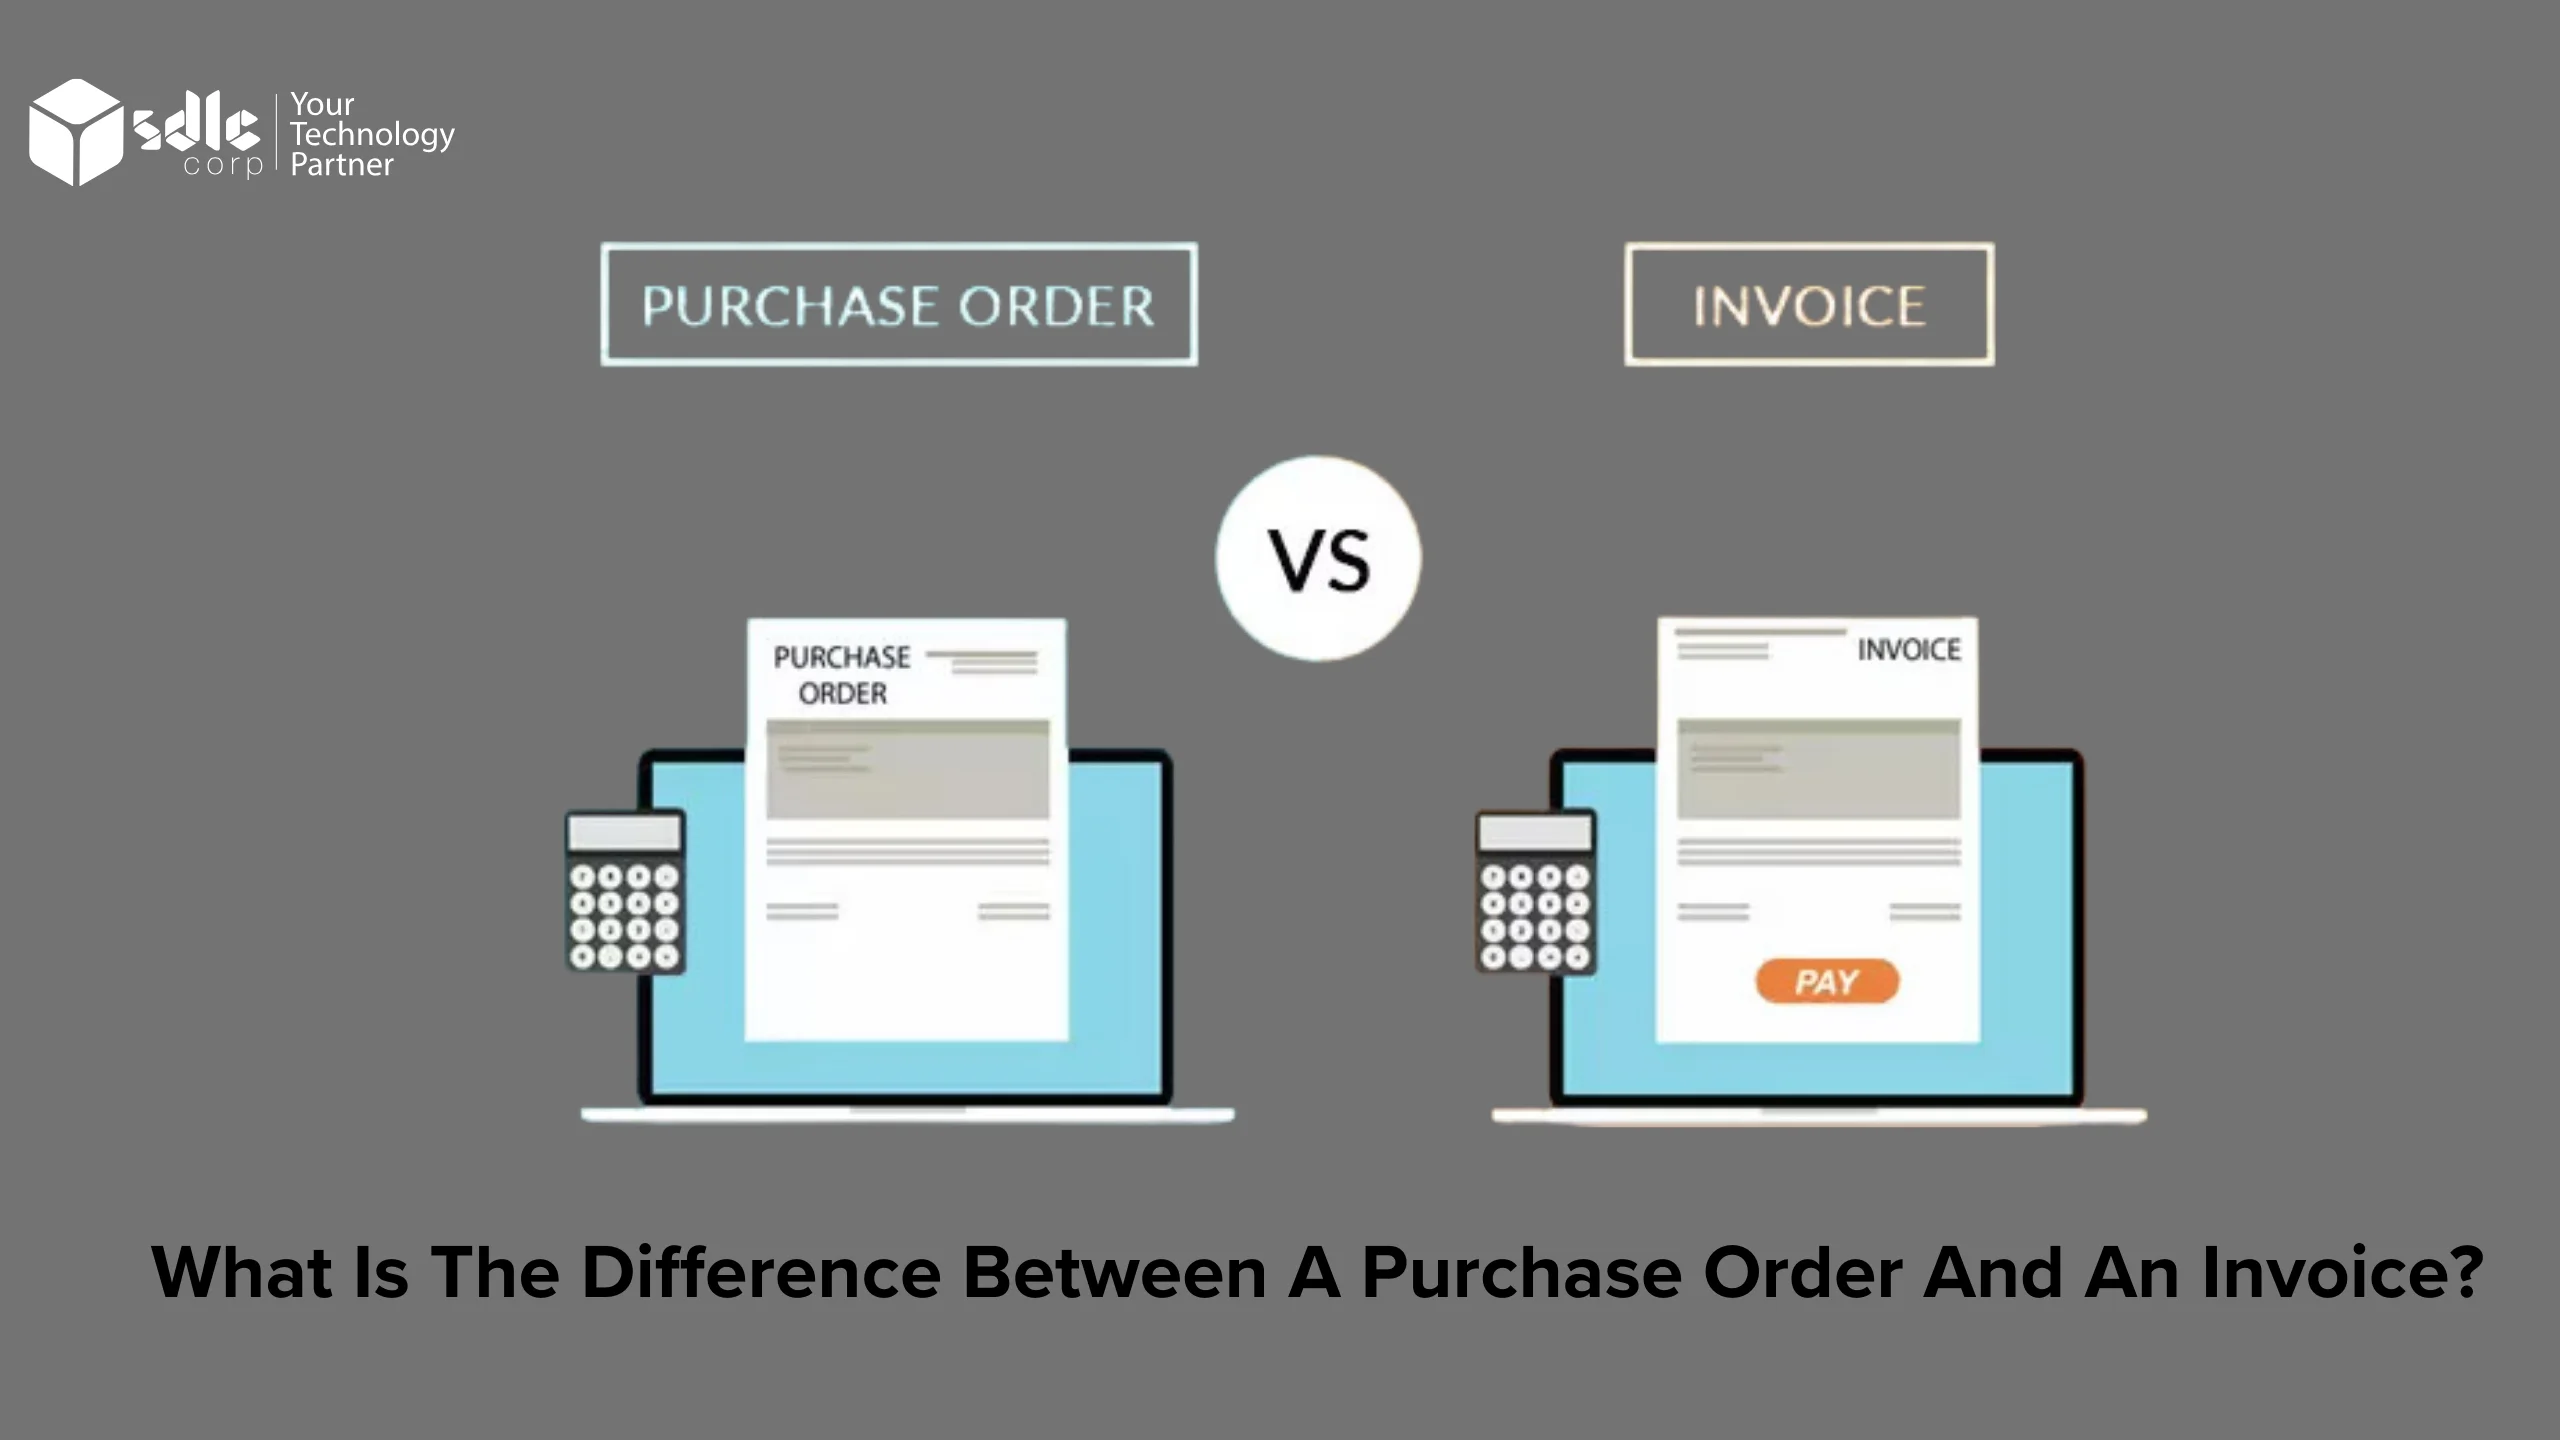 What is the difference between a purchase order and an invoice